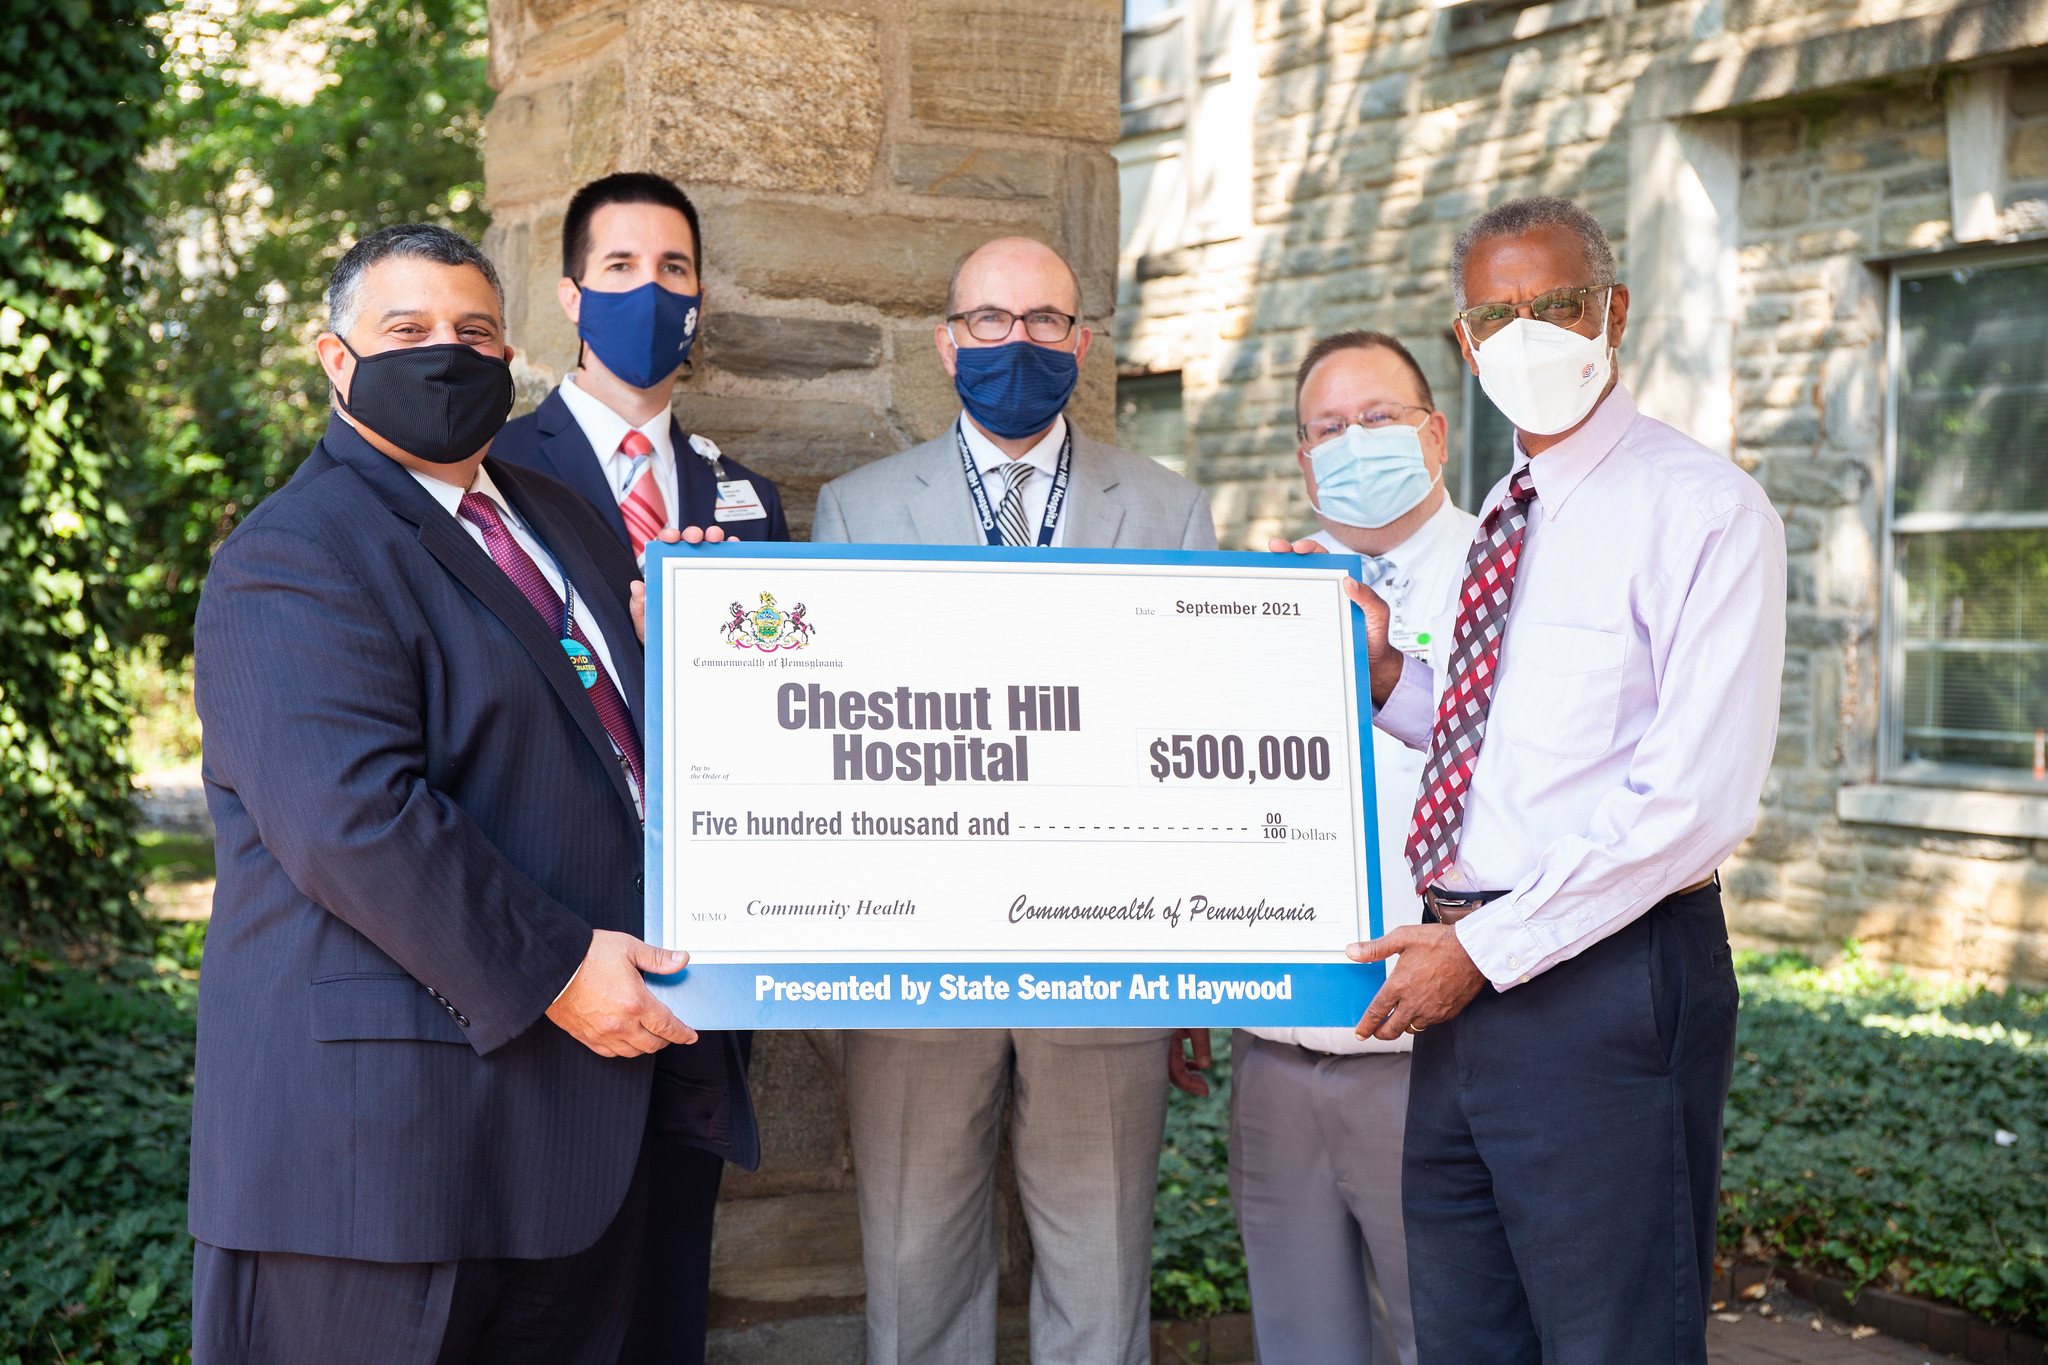 September 15, 2021: Sen. Haywood visited Chestnut Hill Hospital to deliver a check for $500,000 to purchase a new air conditioning unit for the facility.